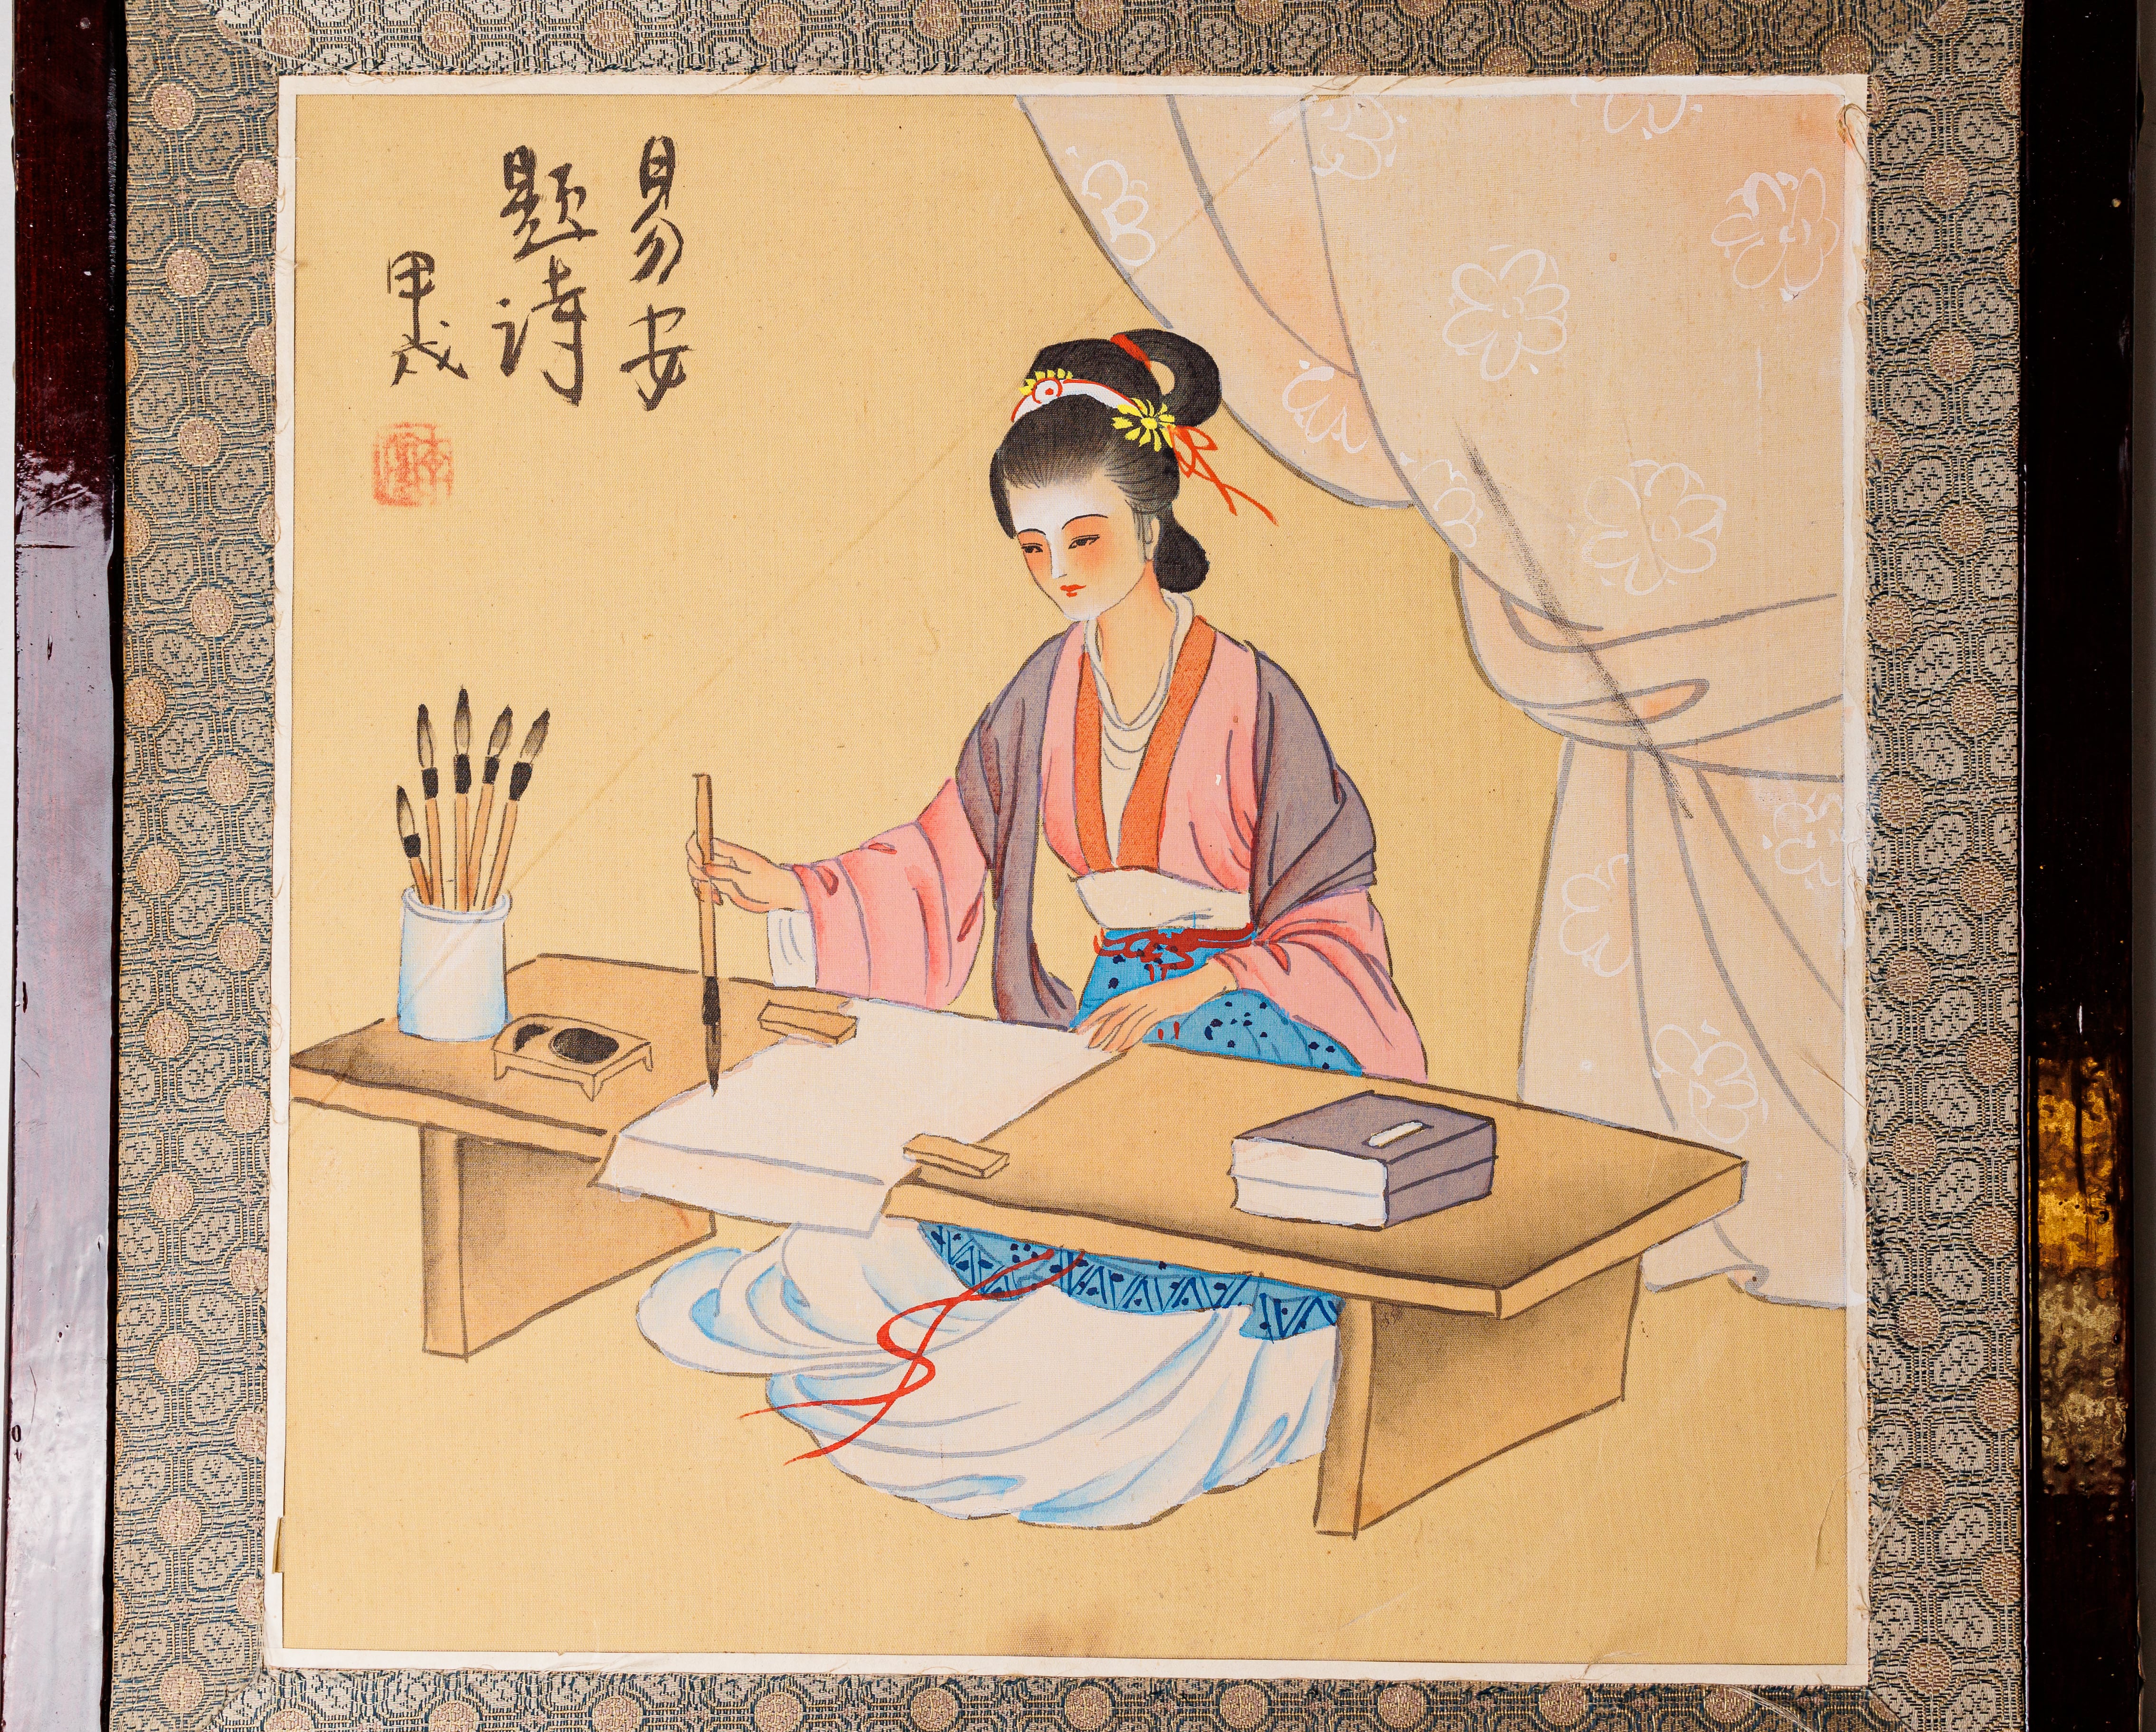 Chinese art "The woman is writting" - Image 2 of 4